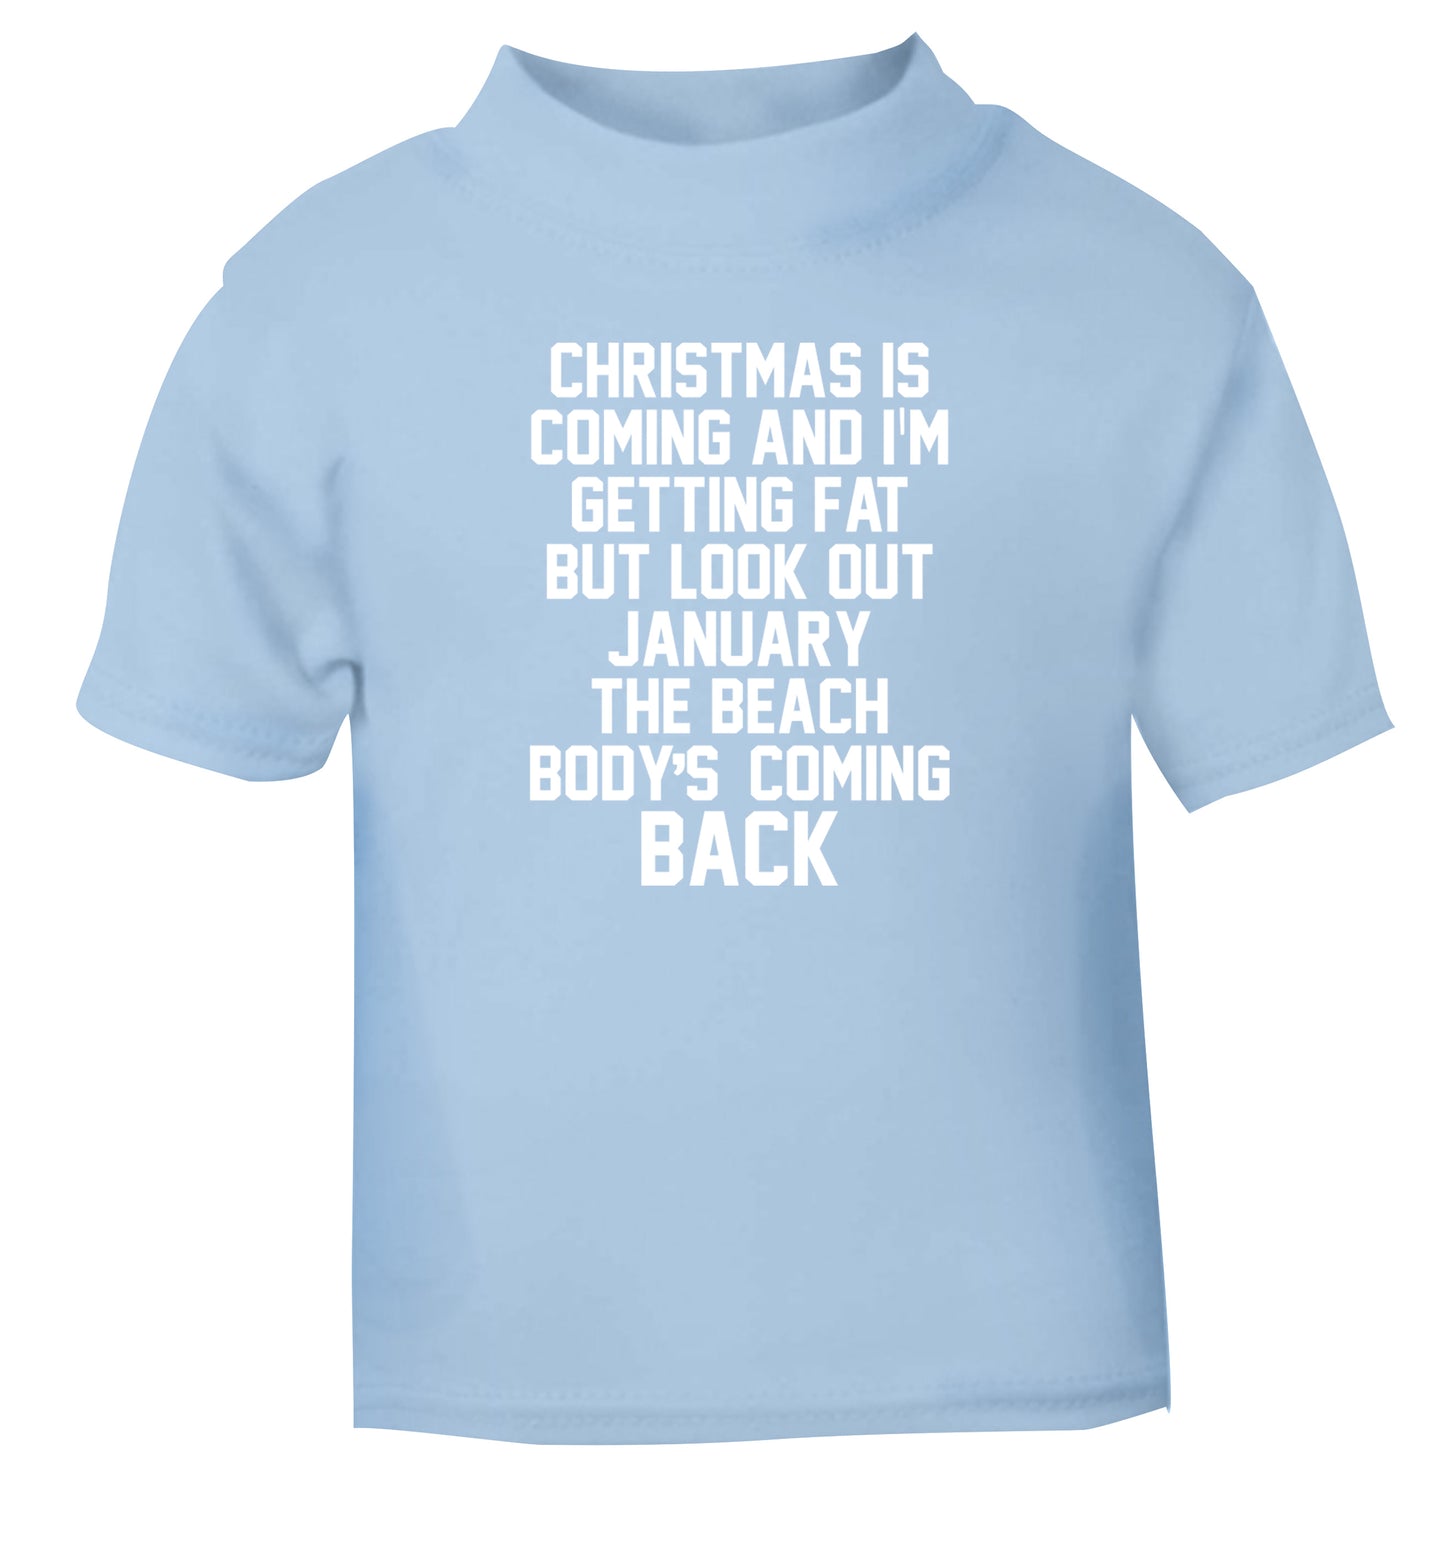 Christmas is coming and I'm getting fat but look out January the beach body's coming back! light blue Baby Toddler Tshirt 2 Years